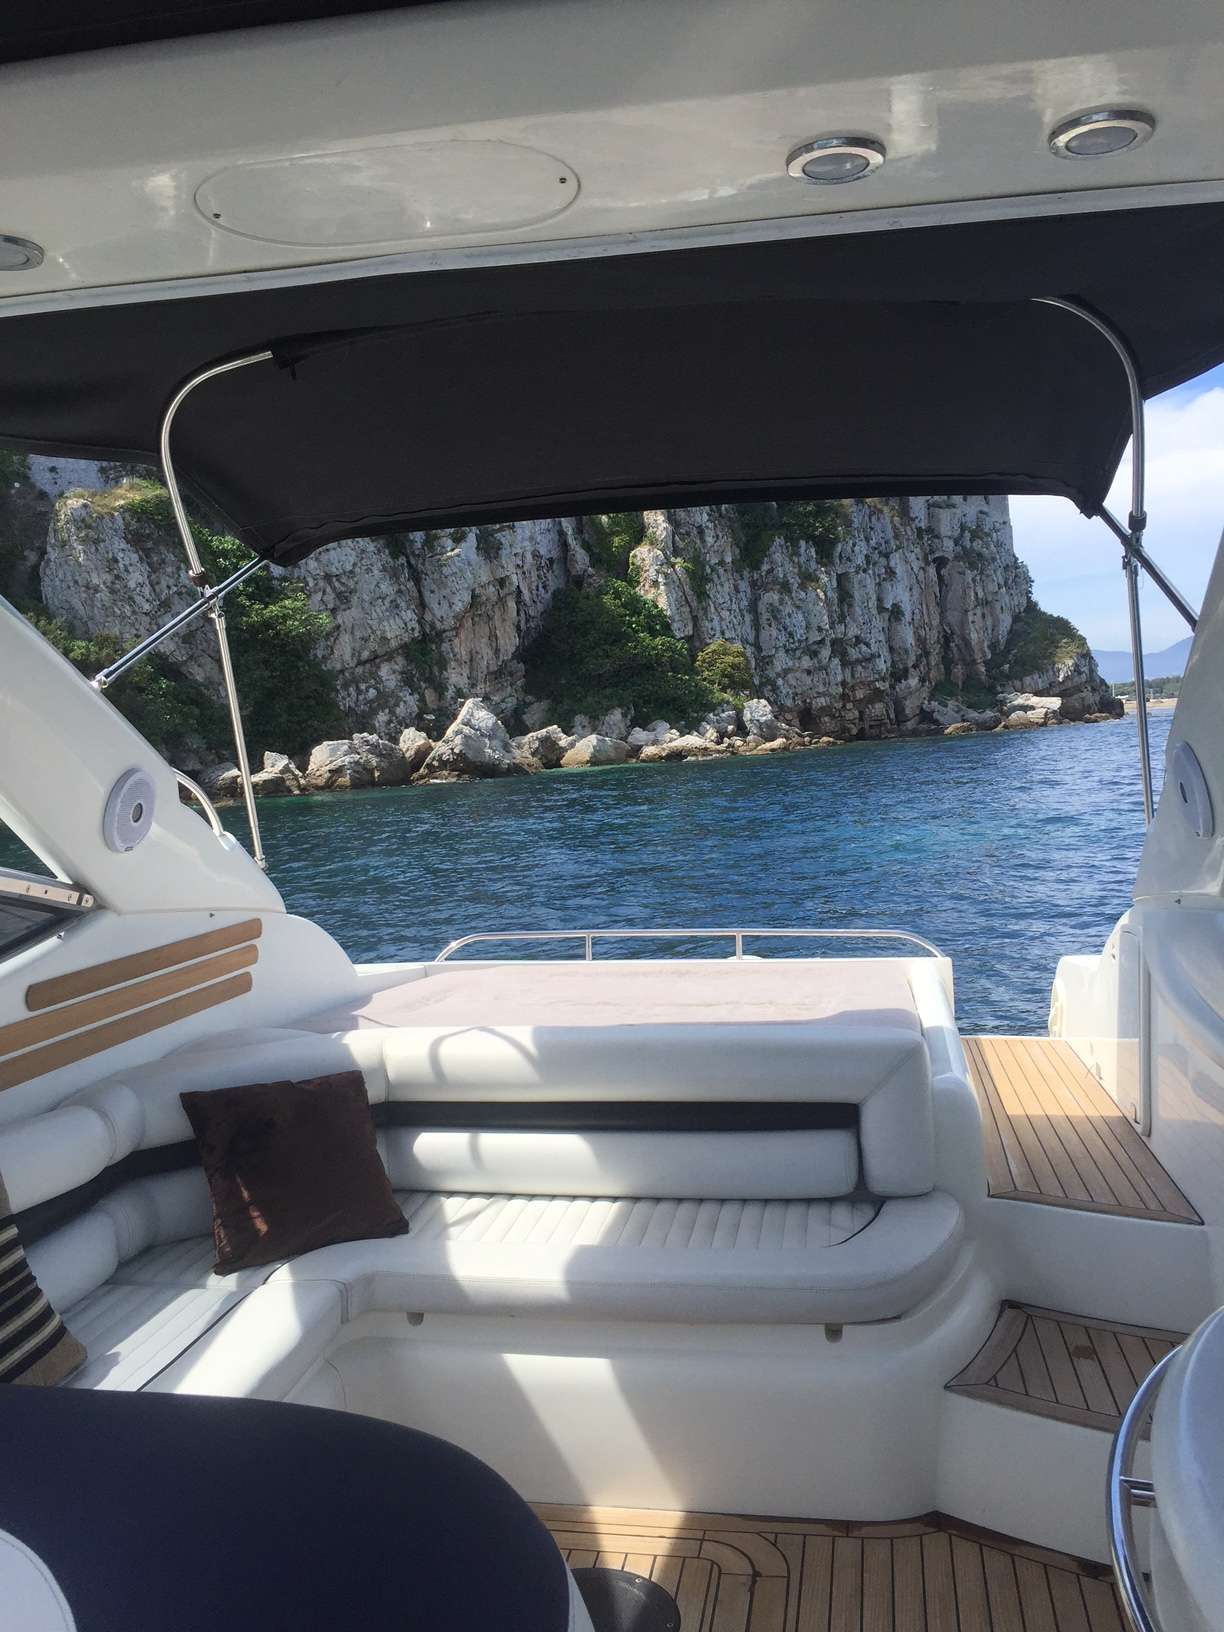 Sunseeker 48 - Yacht Charter Cannes & Boat hire in France French Riviera Cannes Vieux port de Vallauris 5